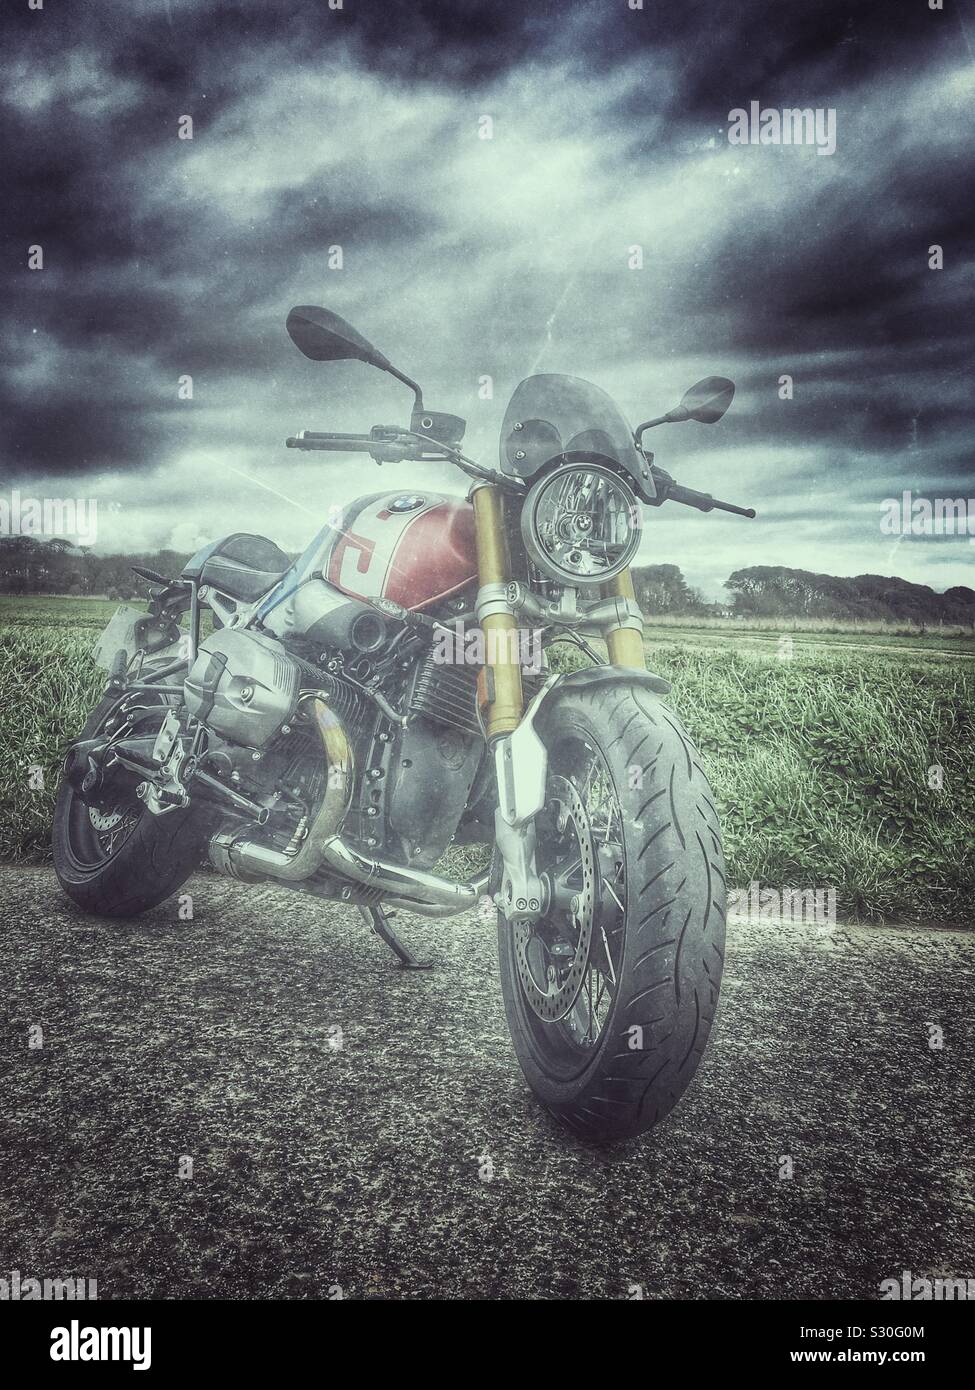 BMW r nine t retro cafe racer hipster motorcycle Stock Photo